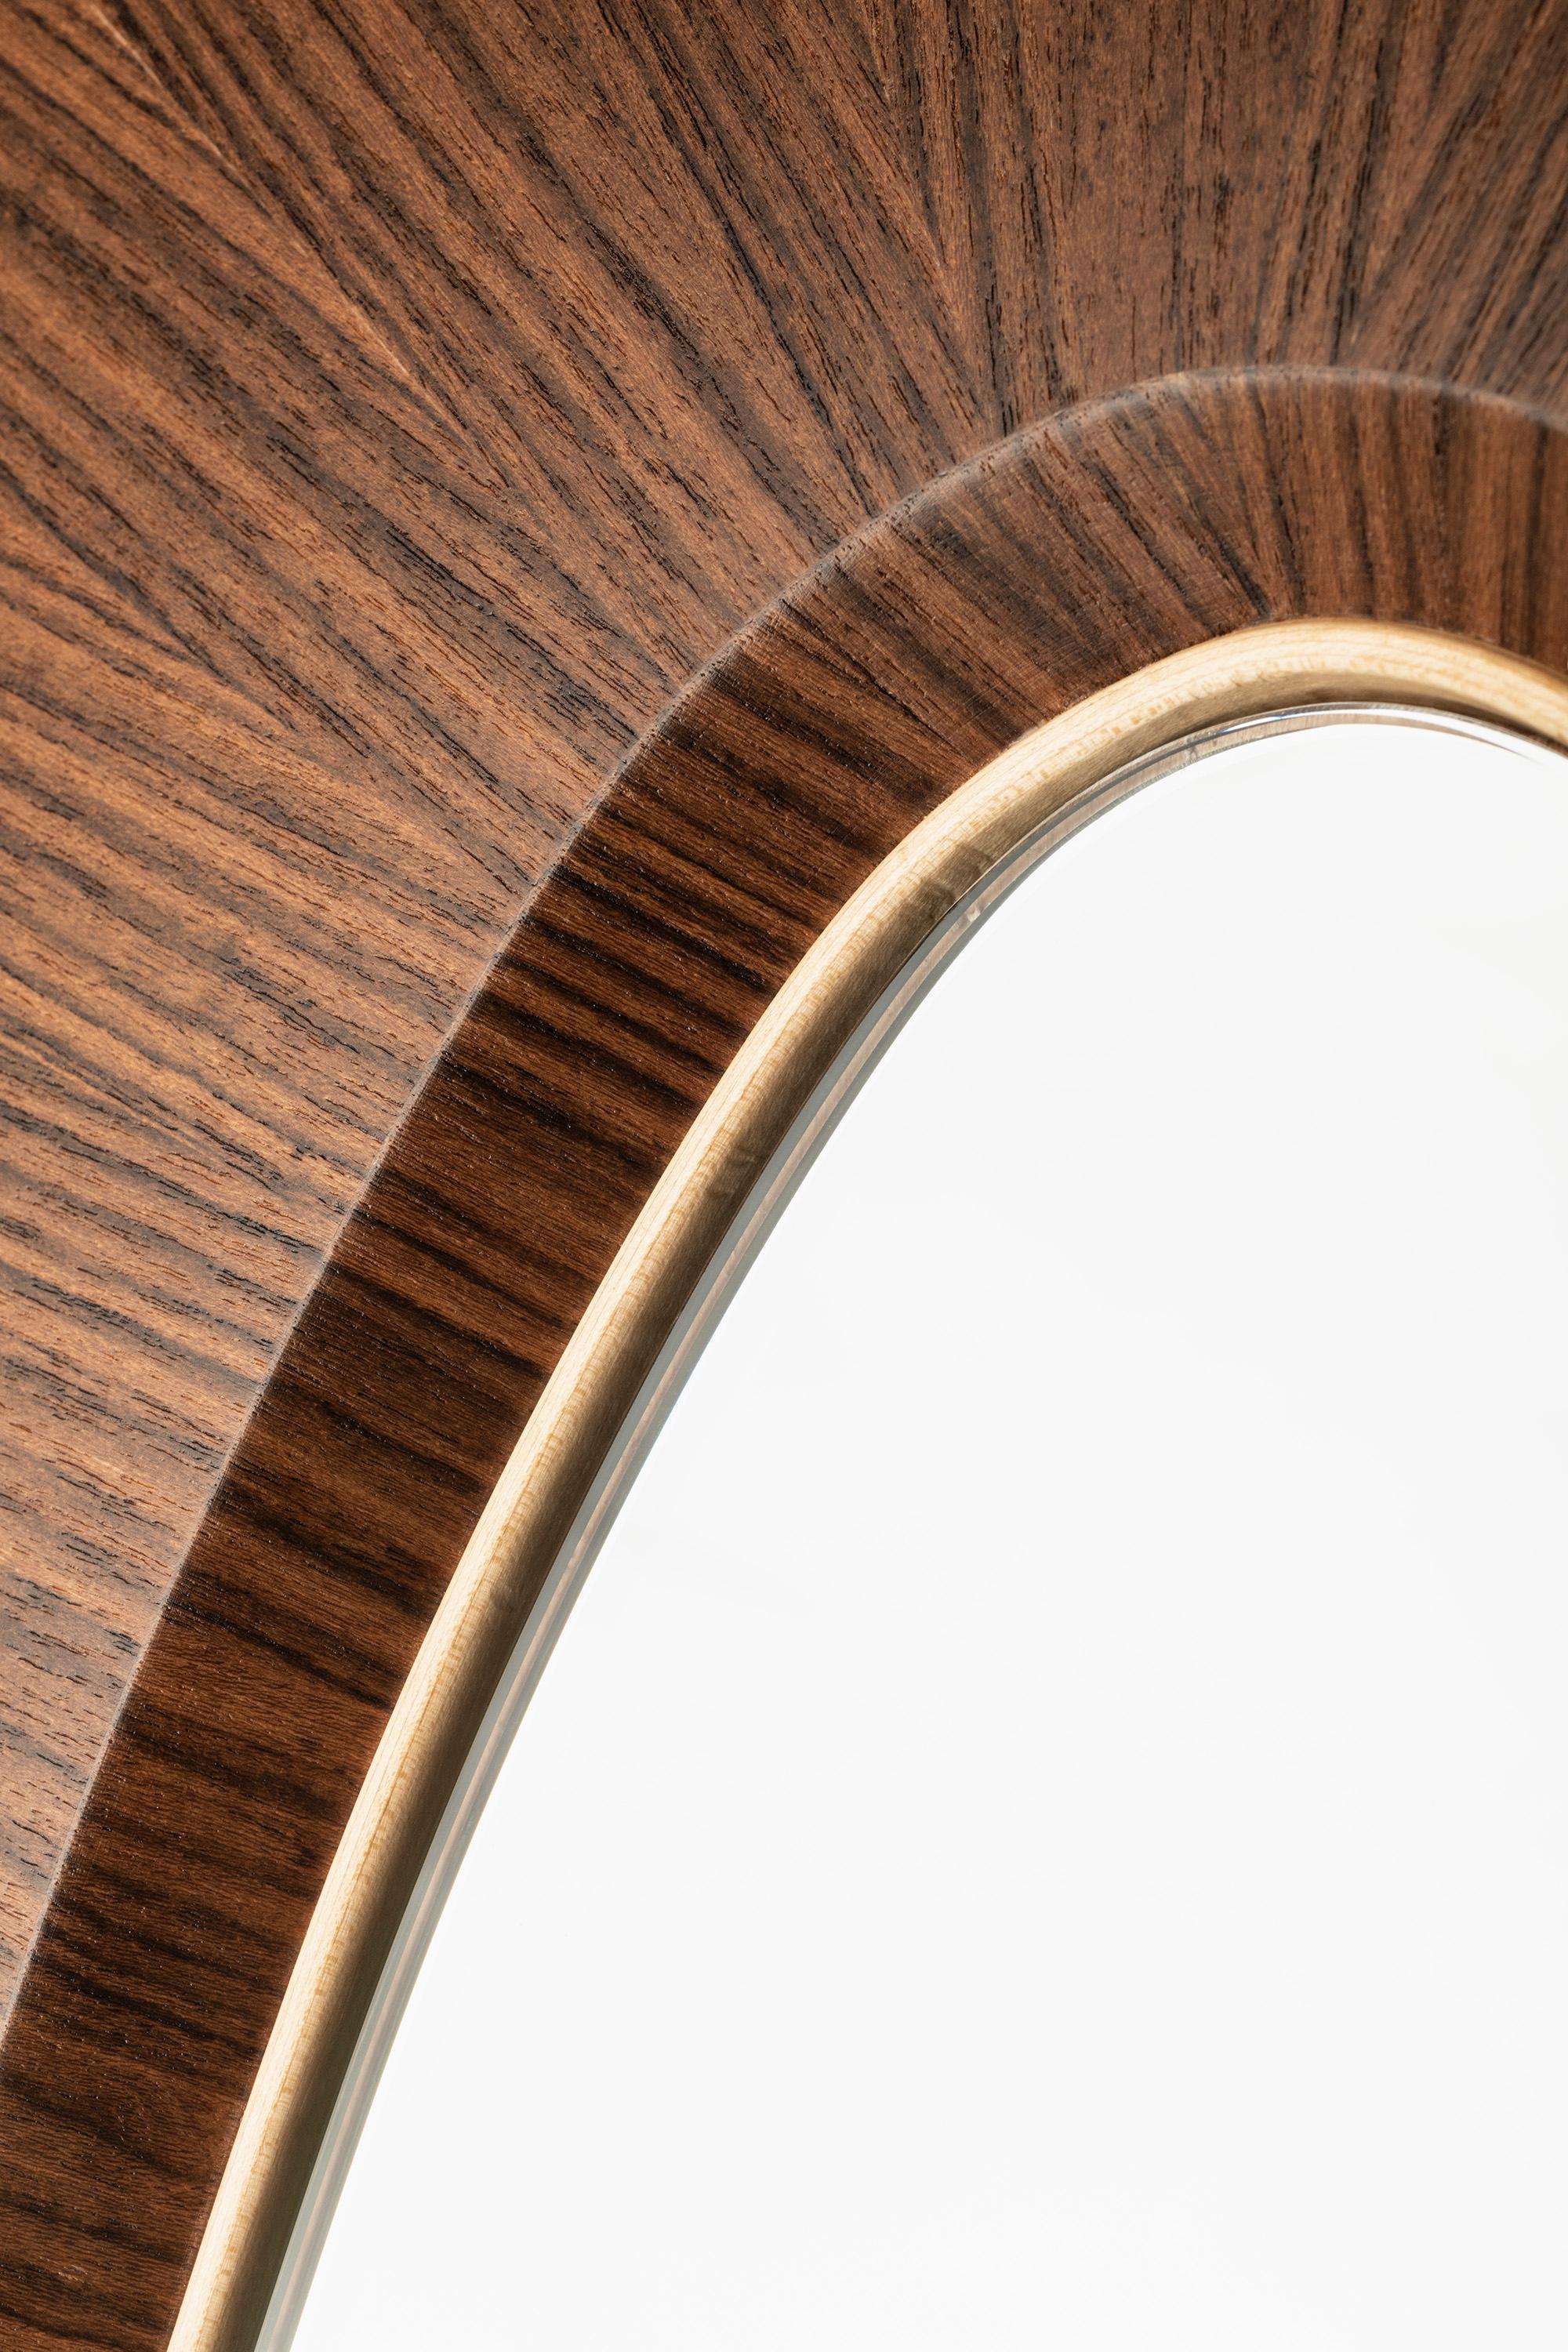 Modern Grimilde Walnut and Glass Floor Mirror by Giordano Viganò and Simone Crestani For Sale